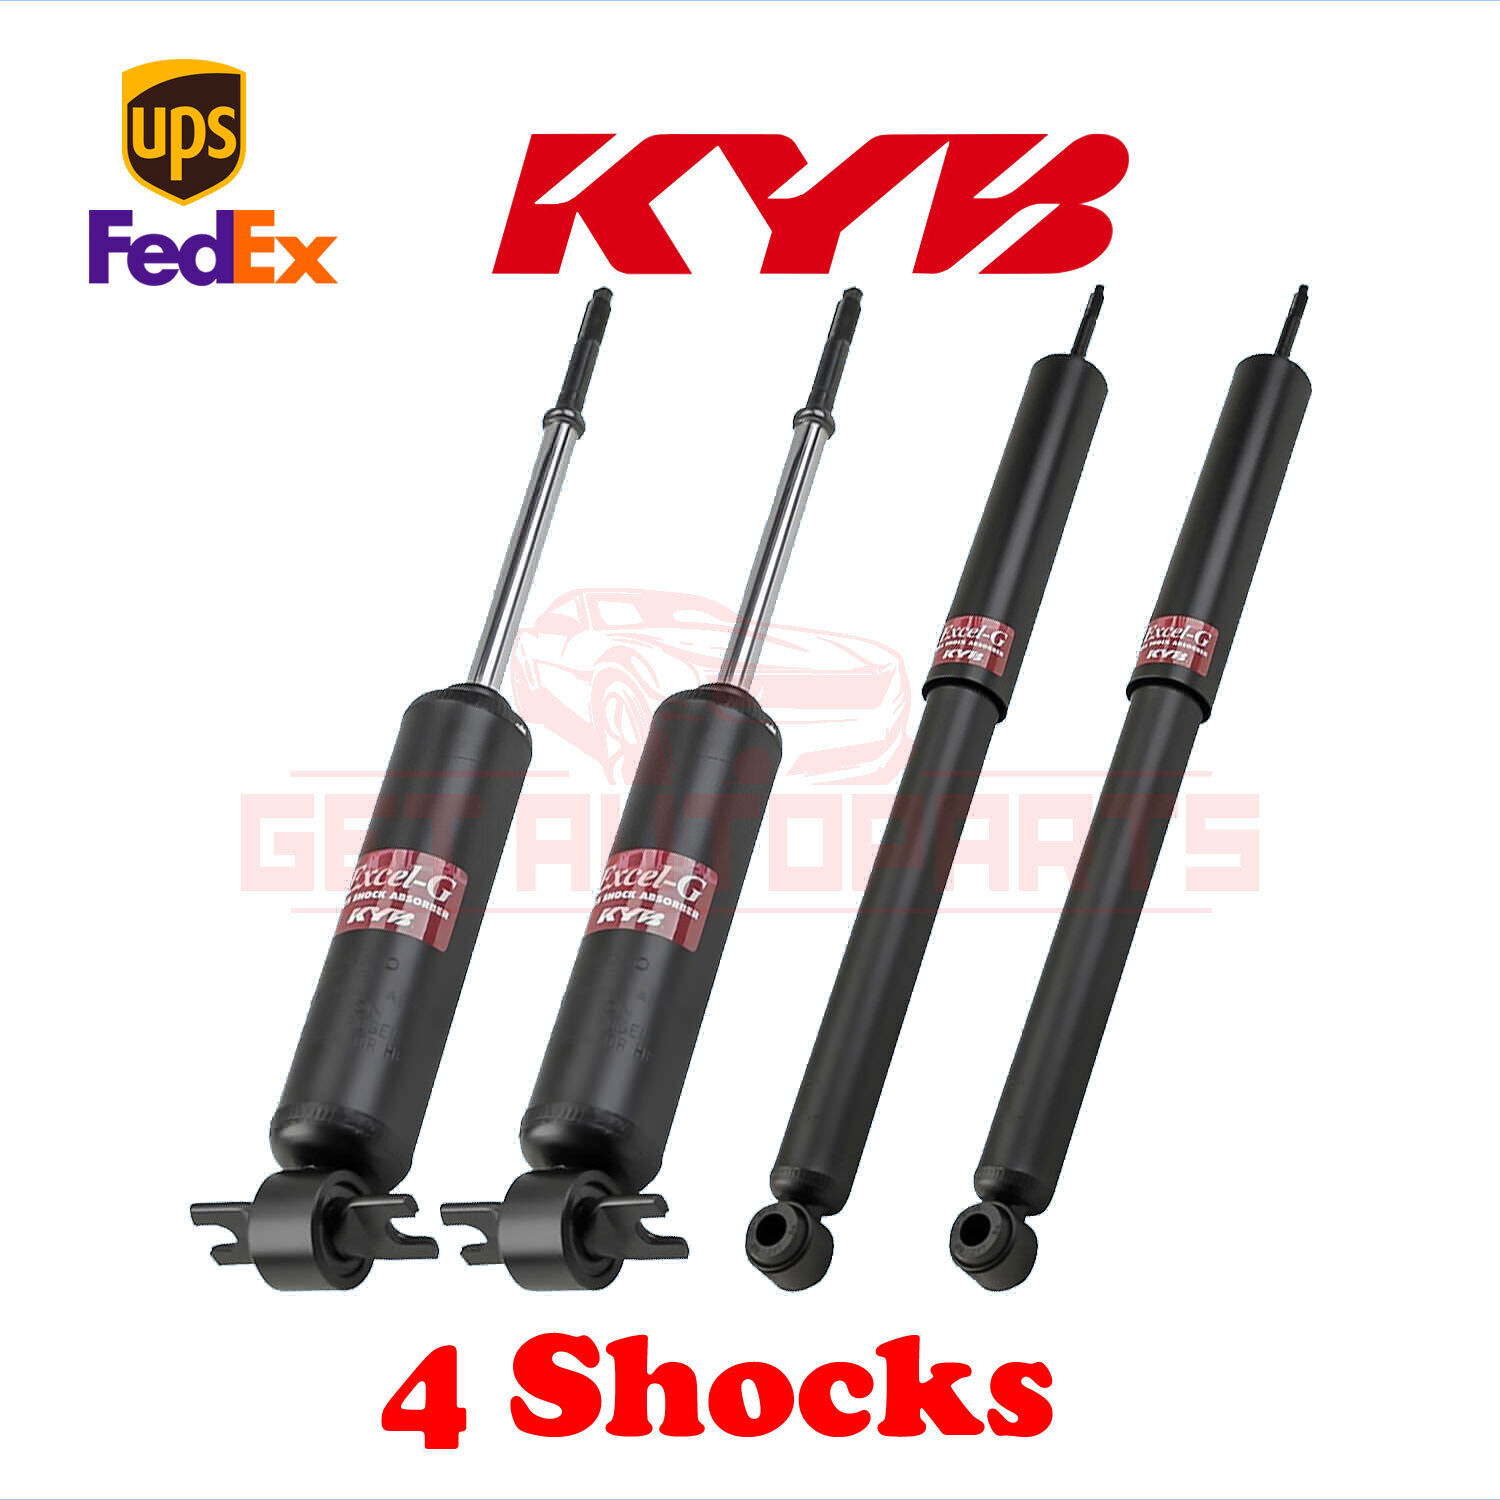 KYB Kit 4 Shocks Front Rear for MERCURY Cyclone 1972-76 GR-2/EXCEL-G